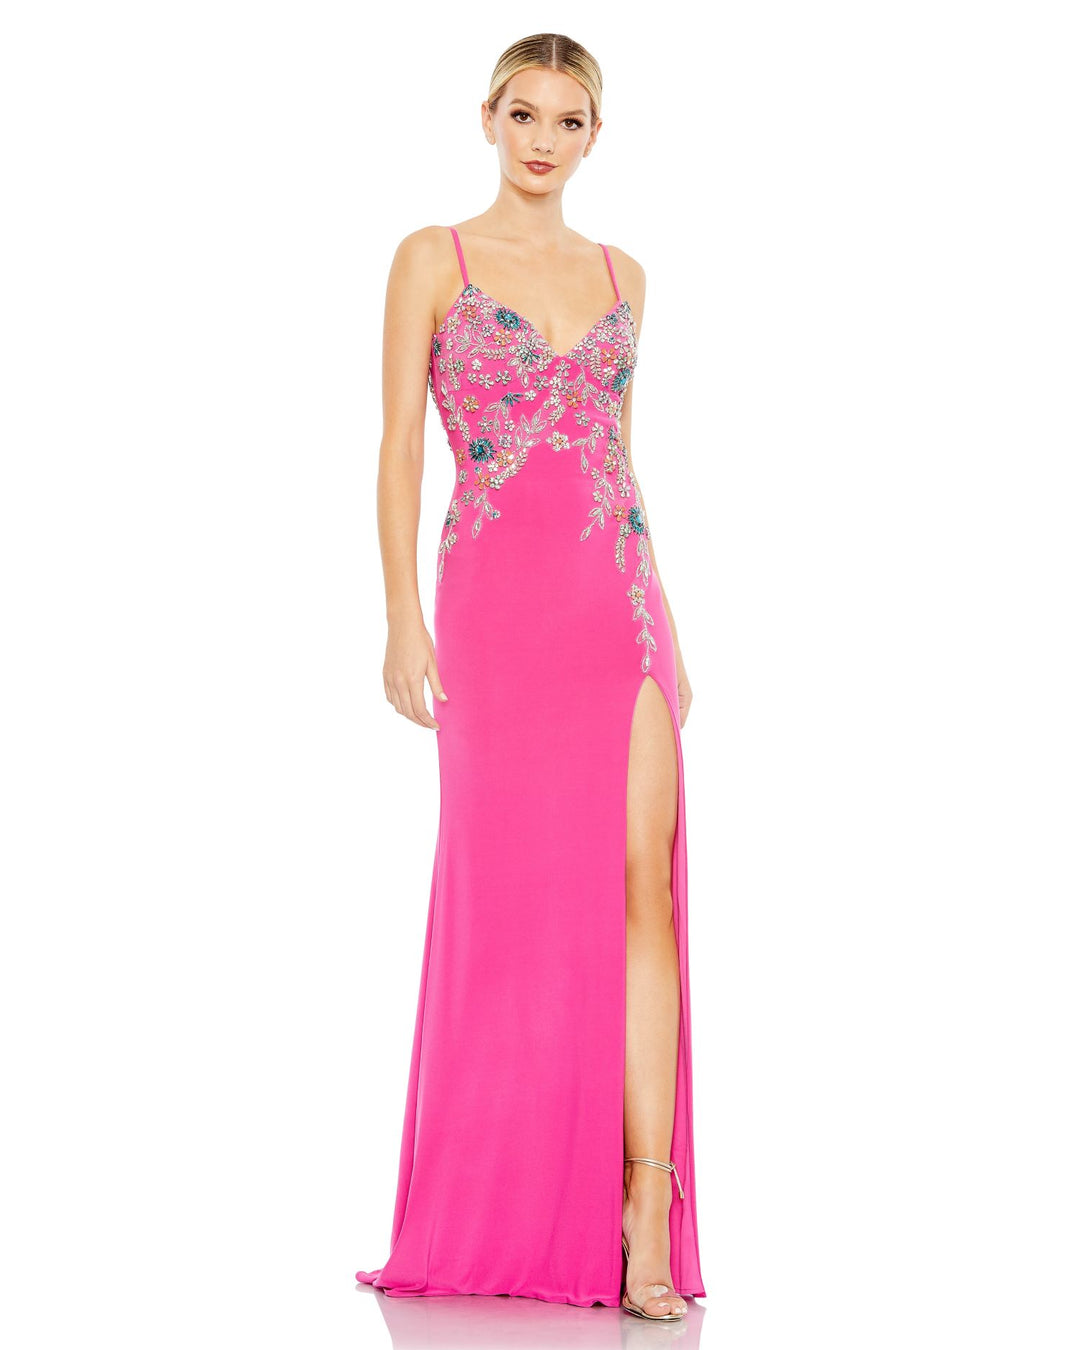 Mac Duggal, Multi Colour Beaded Floral Cami Gown - Candy Pink  | Shop Prom Dresses, Wedding Guest Dresses, and Black Tie Evening Gowns Online at SHAIDE! 